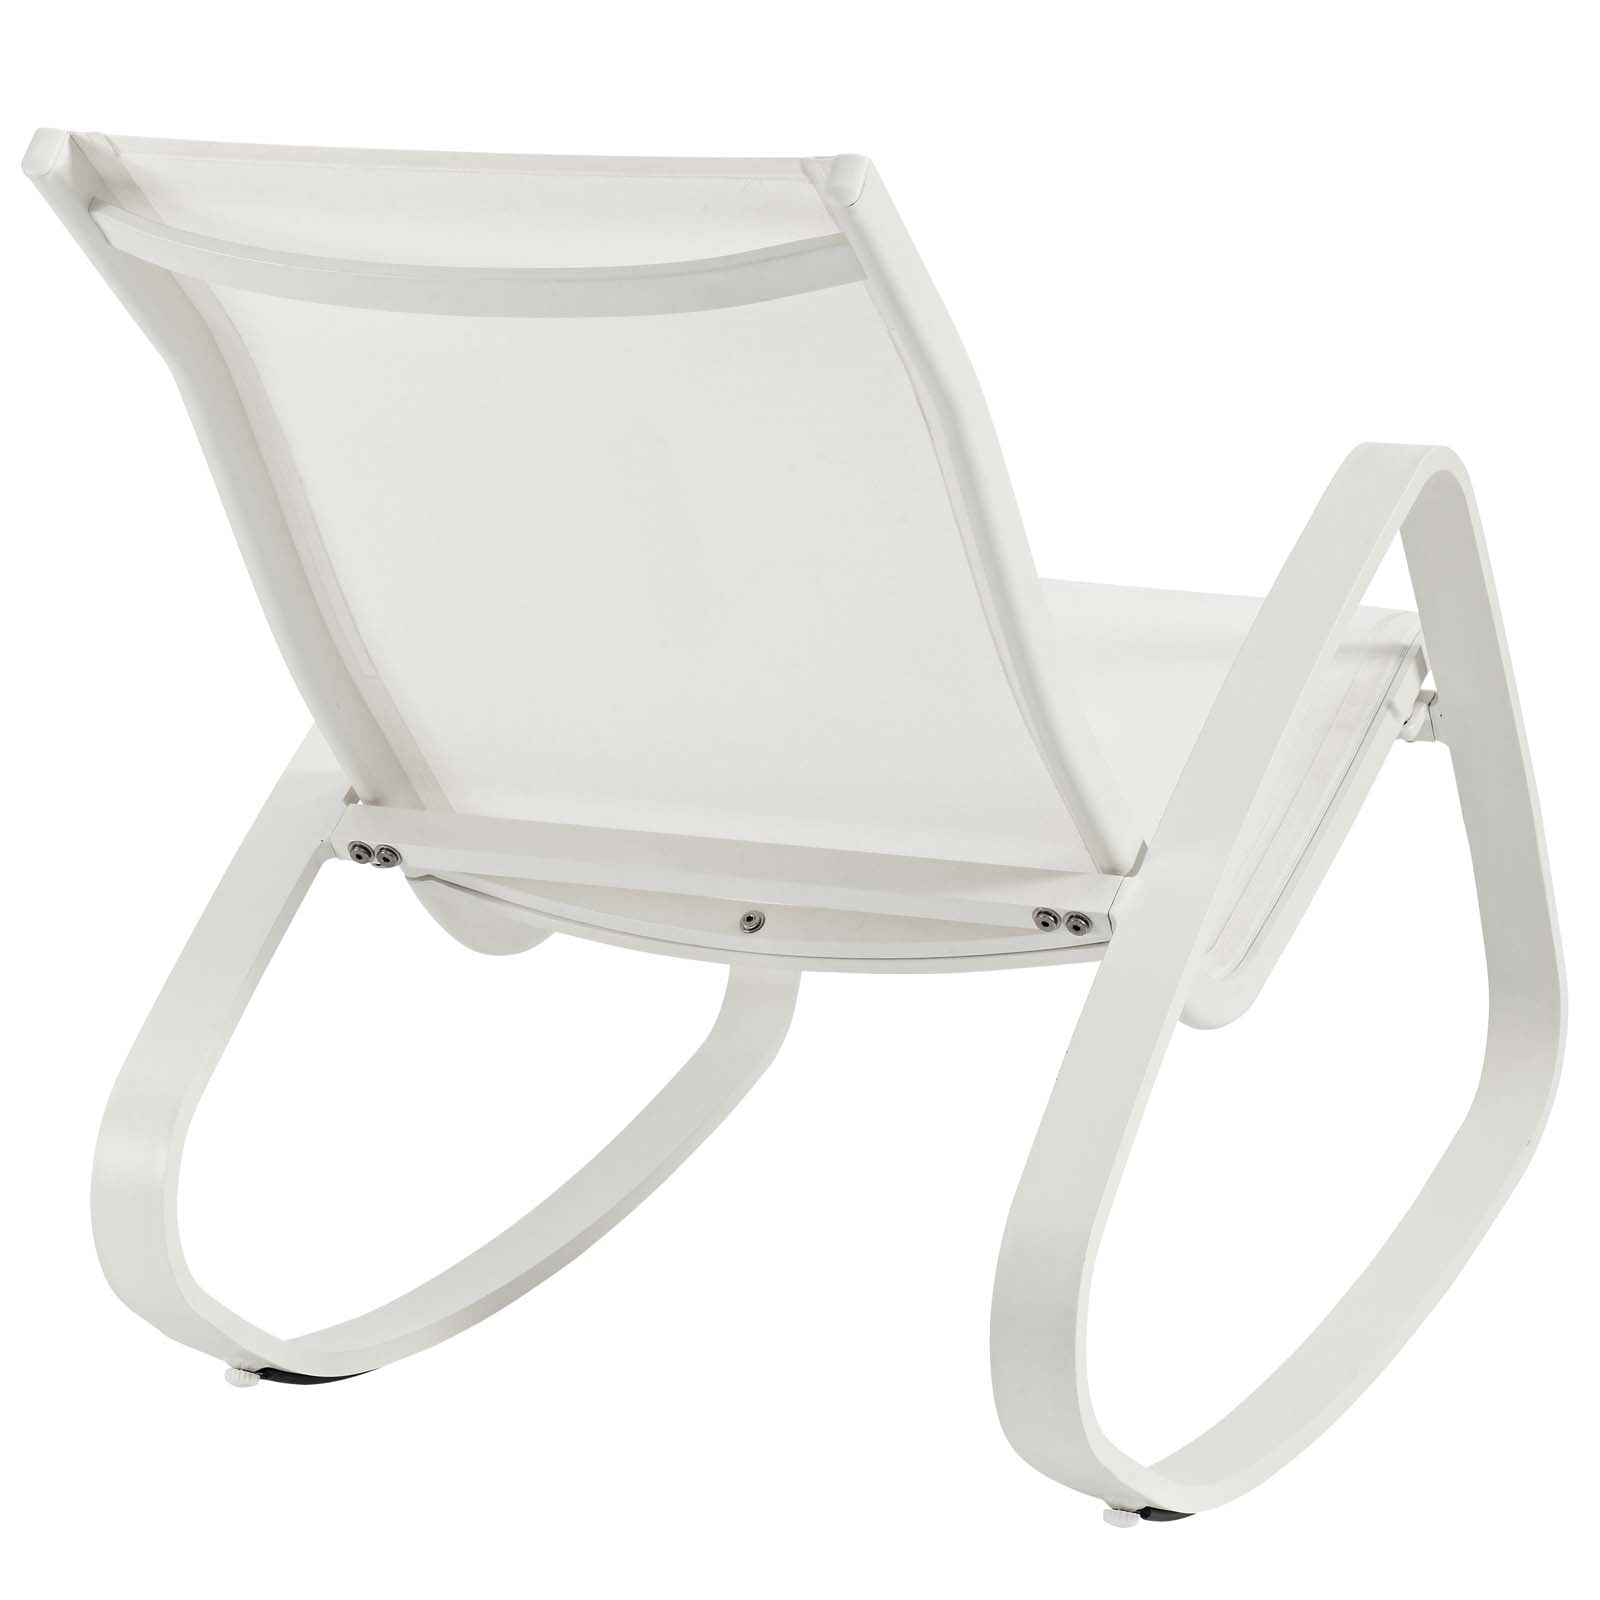 Modway Outdoor Chairs - Traveler Rocking Outdoor Patio Mesh Sling Lounge Chair White White